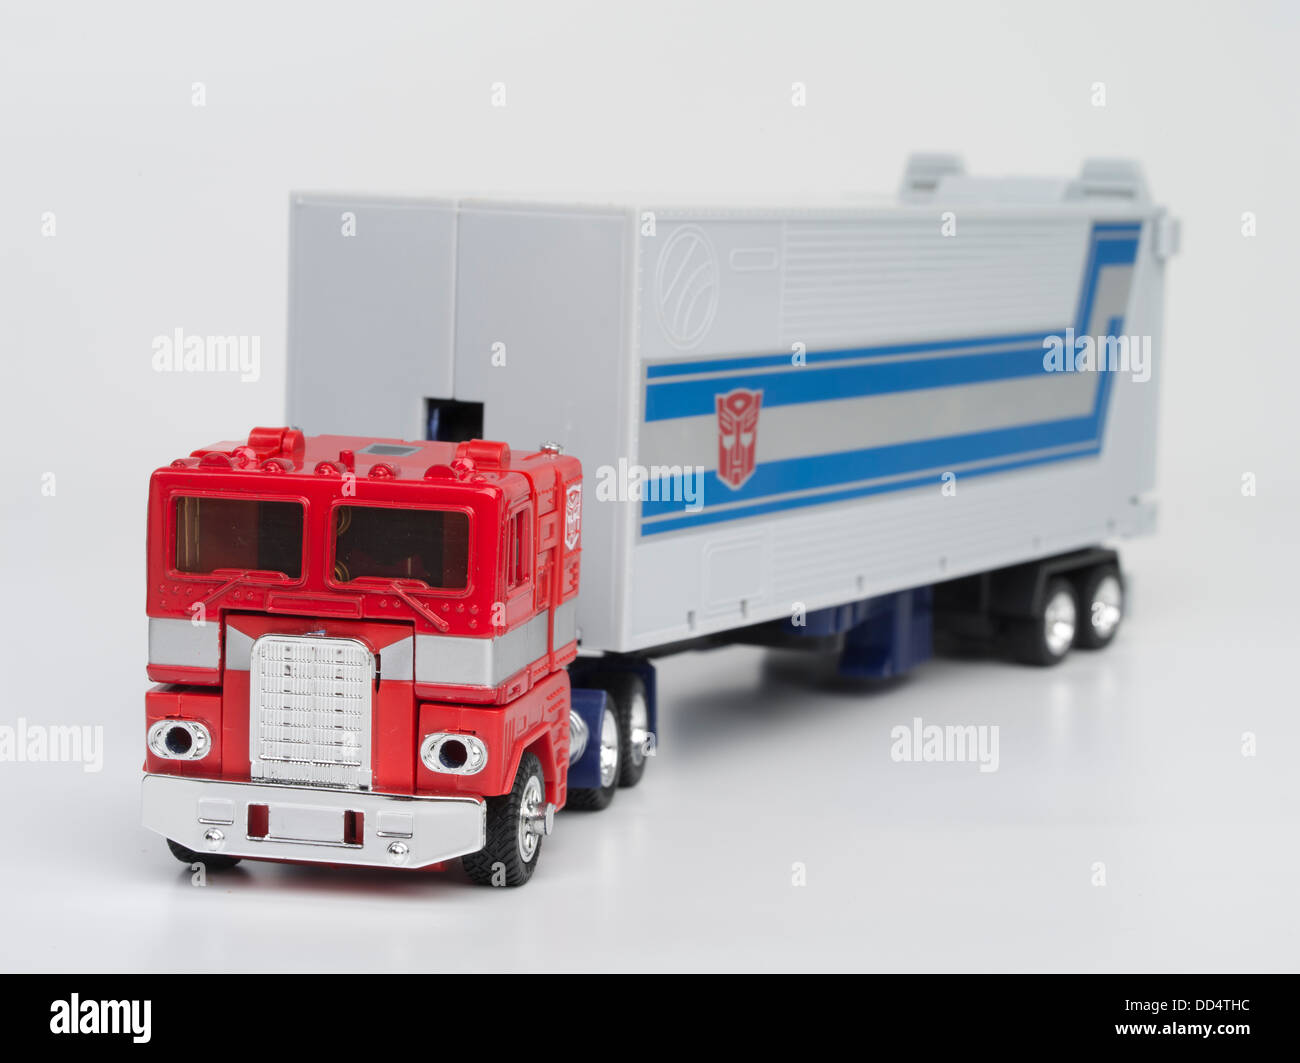 Transformers Toy High Resolution Stock Photography and Images - Alamy